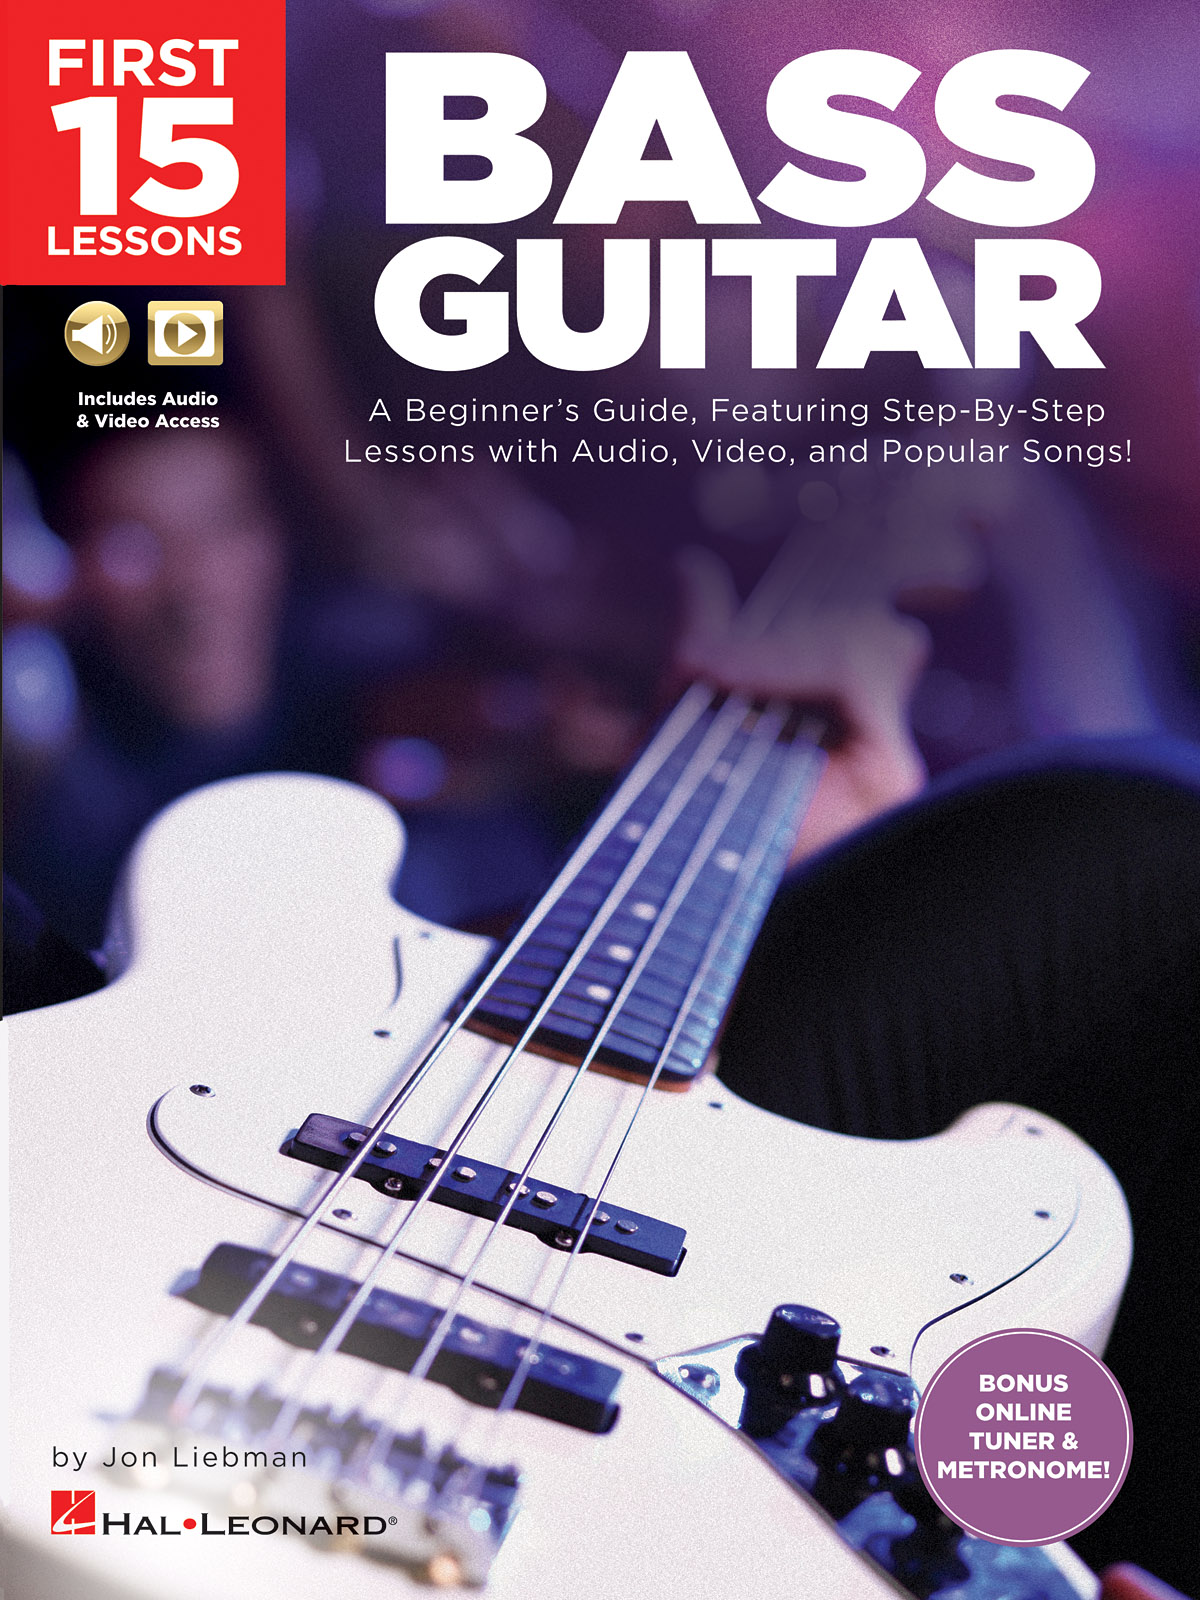 First 15 Lessons - Bass Guitar - A Beginner's Guide, Featuring Step-By-Step Lessons with Audio, Video, and Popular Songs! - noty pro basovou kytaru